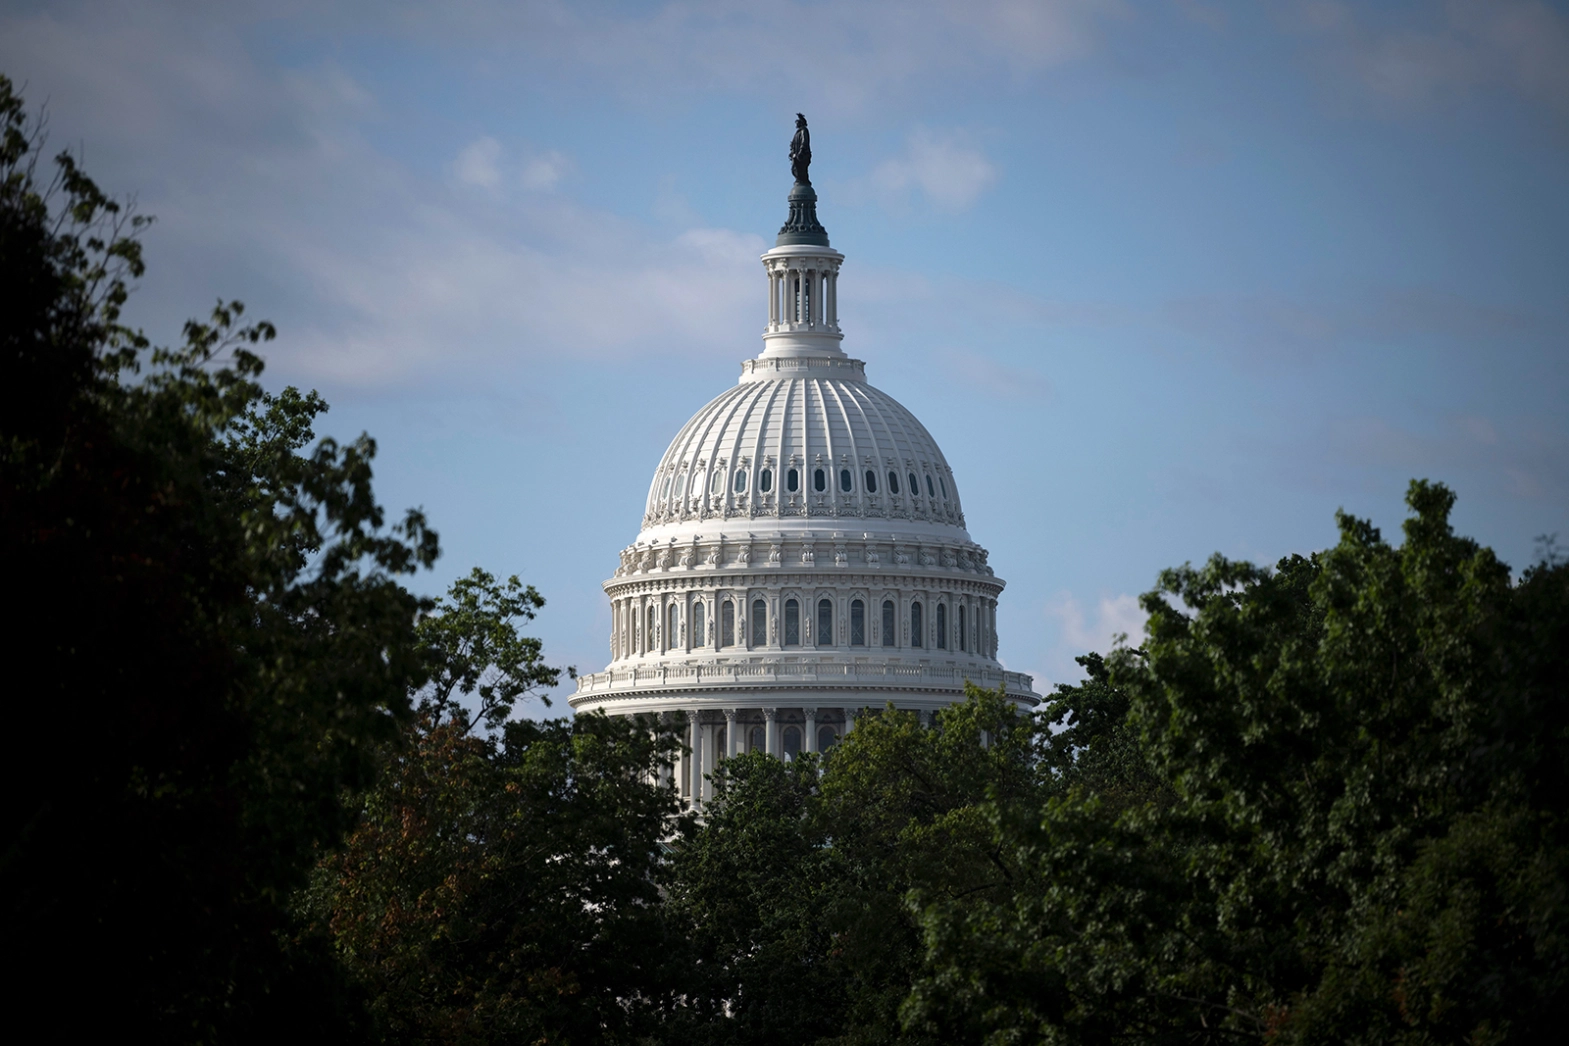 Members of Congress are turning a blind eye to the passing of Medicare funds to the for-profit corporations who have lavishly contributed to their political campaign coffers.(Graeme Sloan/Sipa/AP)